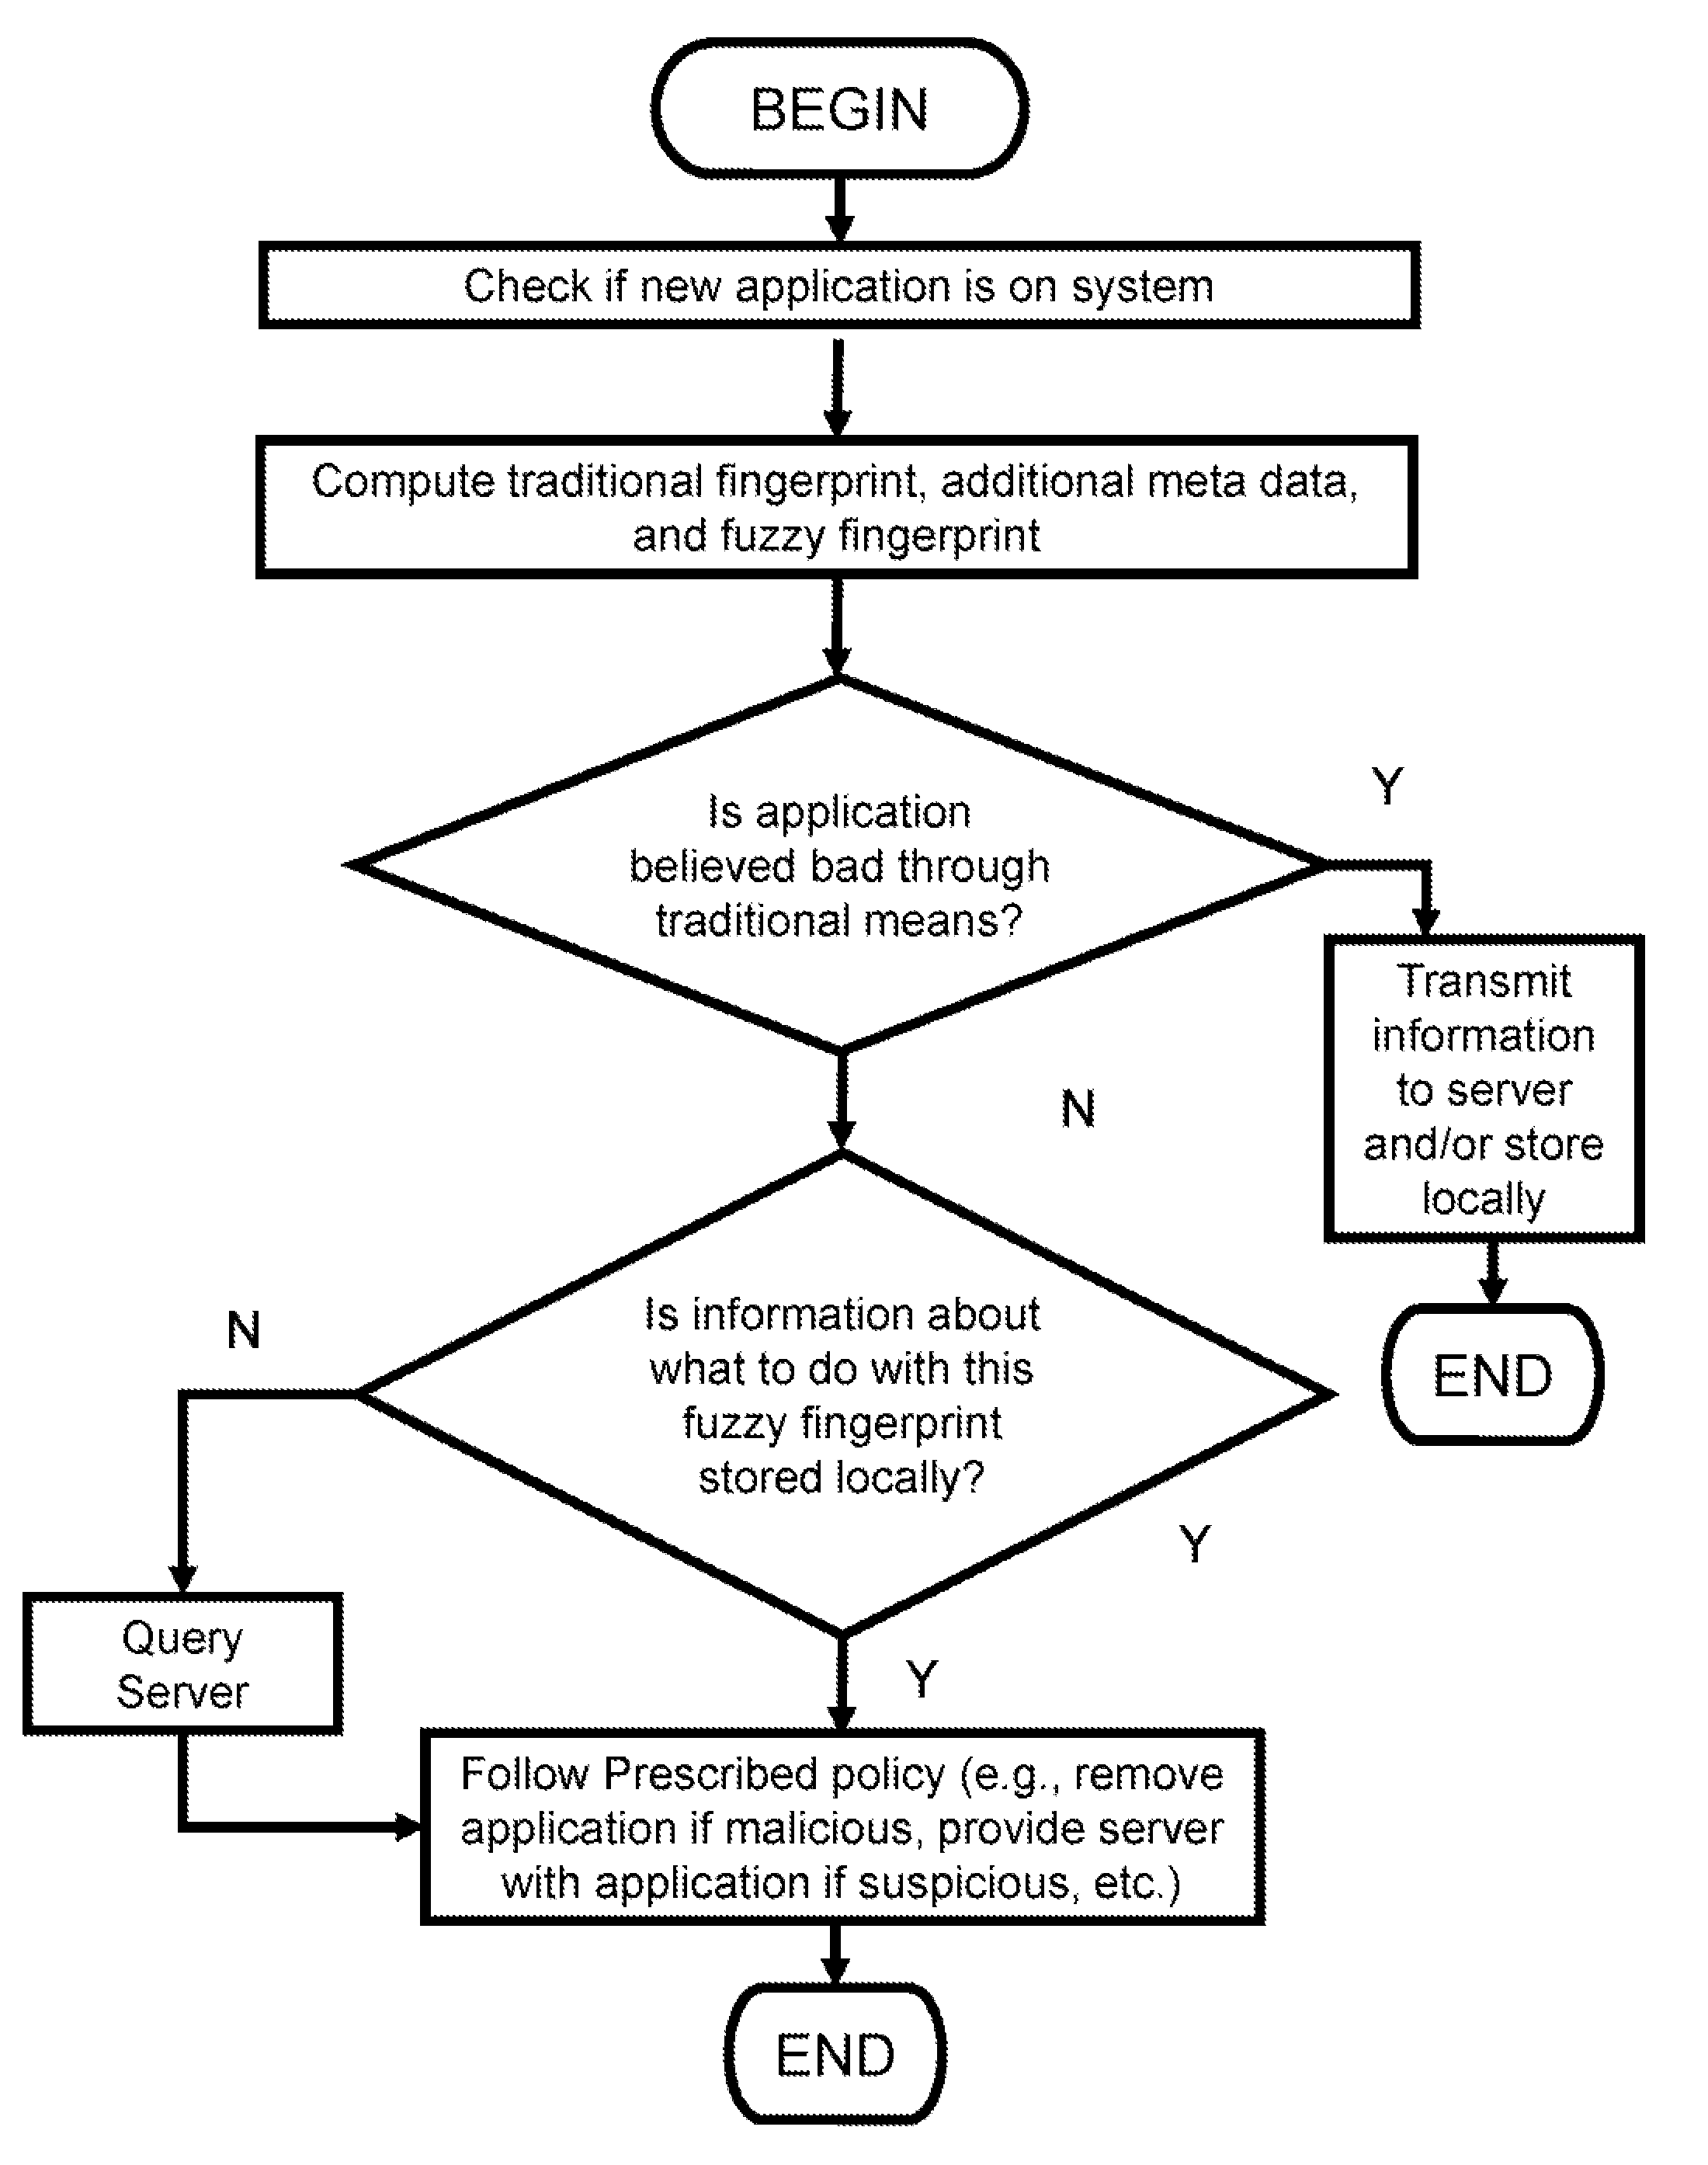 Method and apparatus for detecting malicious software through contextual convictions, generic signatures and machine learning techniques